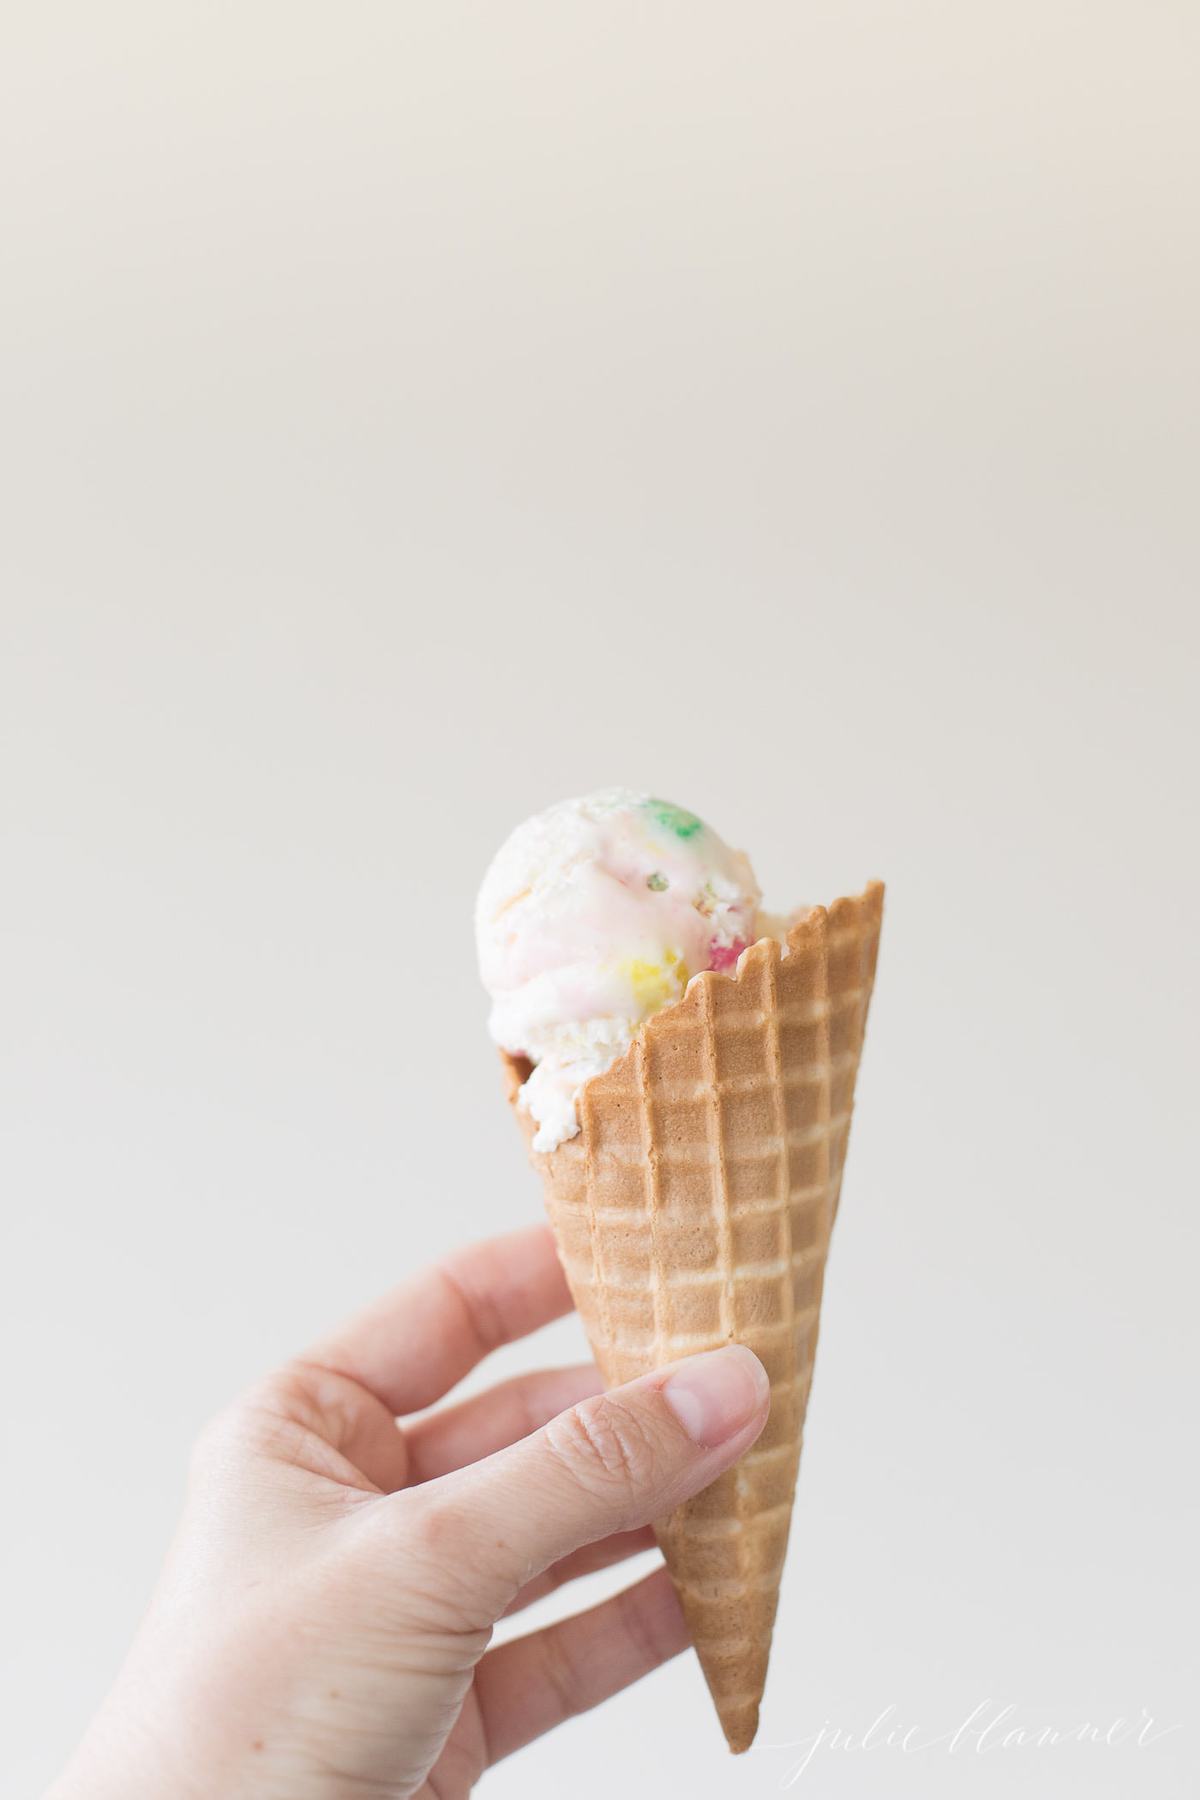 A hand holding a bubble gum ice cream scoop inside a waffle cone. 